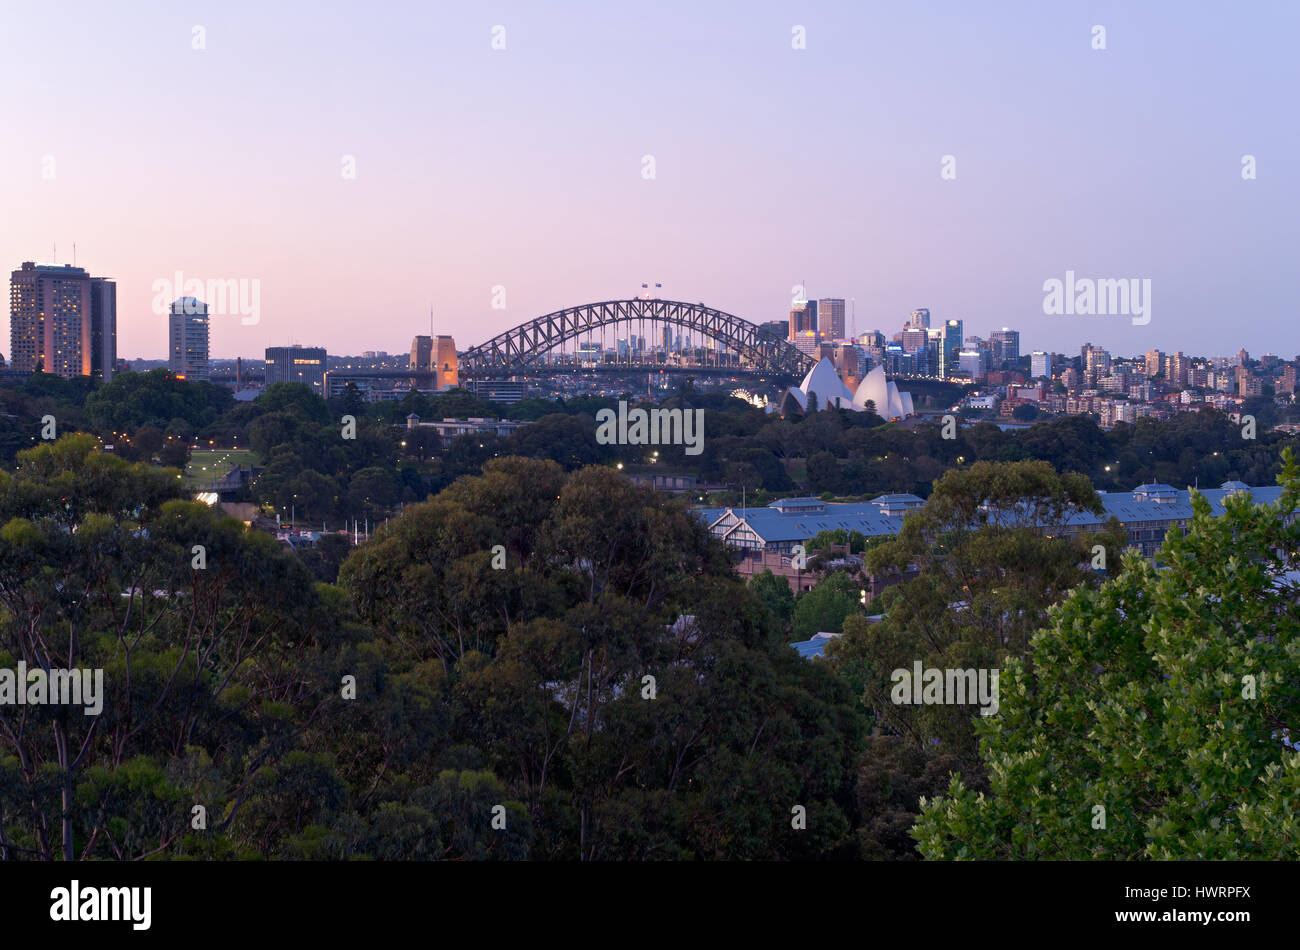 city skyline with buildings landmarks harbor and parks of sydney in new south wales australia Stock Photo